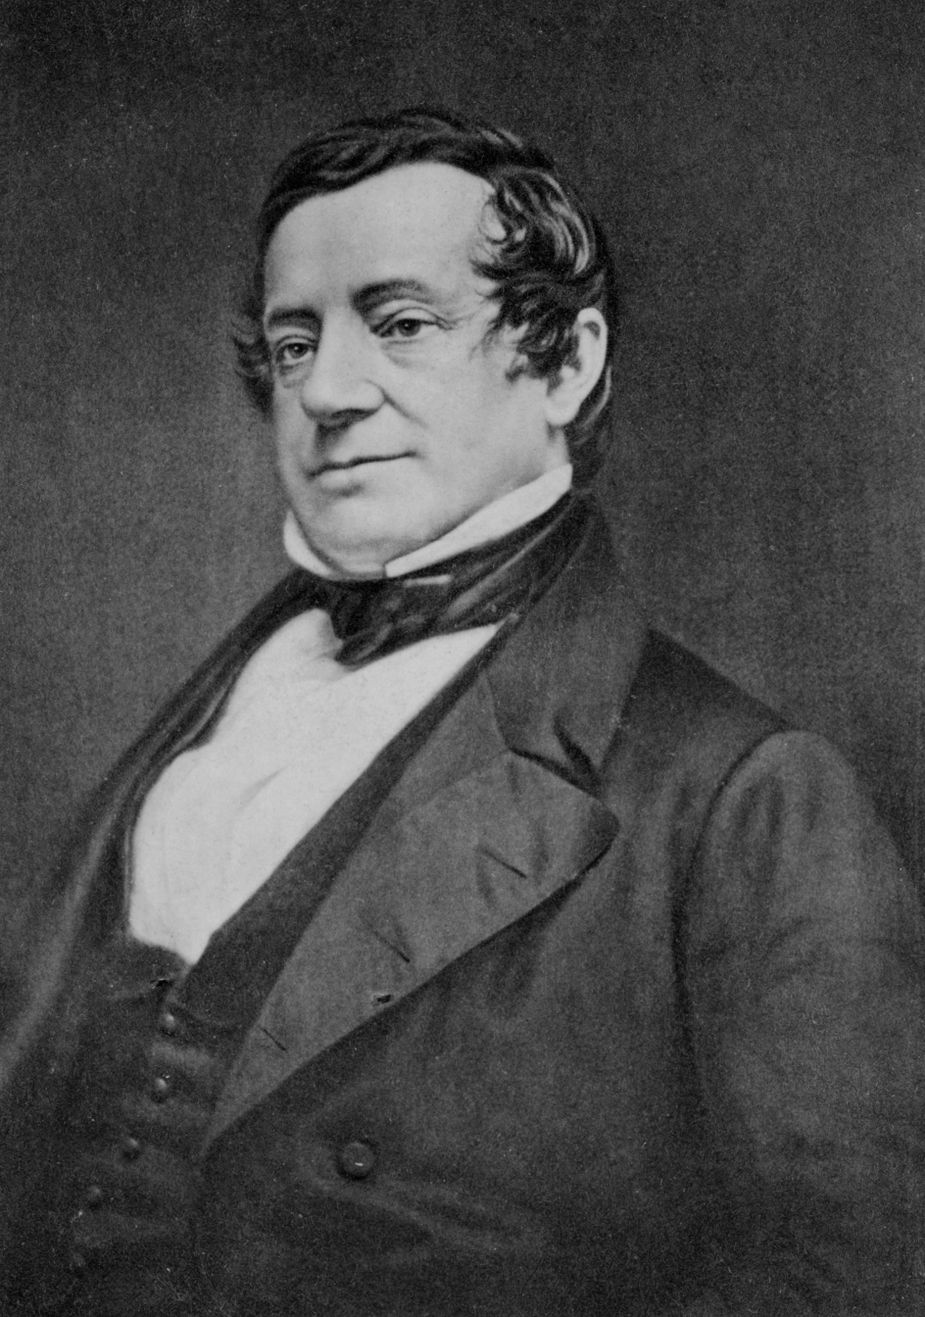 Author Washington Irving is revered in one northeast Oklahoma city. Copy daguerreotype by Mathew Brady, reverse of original by John Plumbe. - This image is available from the United States Library of Congress's Prints and Photographs division under the digital ID cph.3c10044.